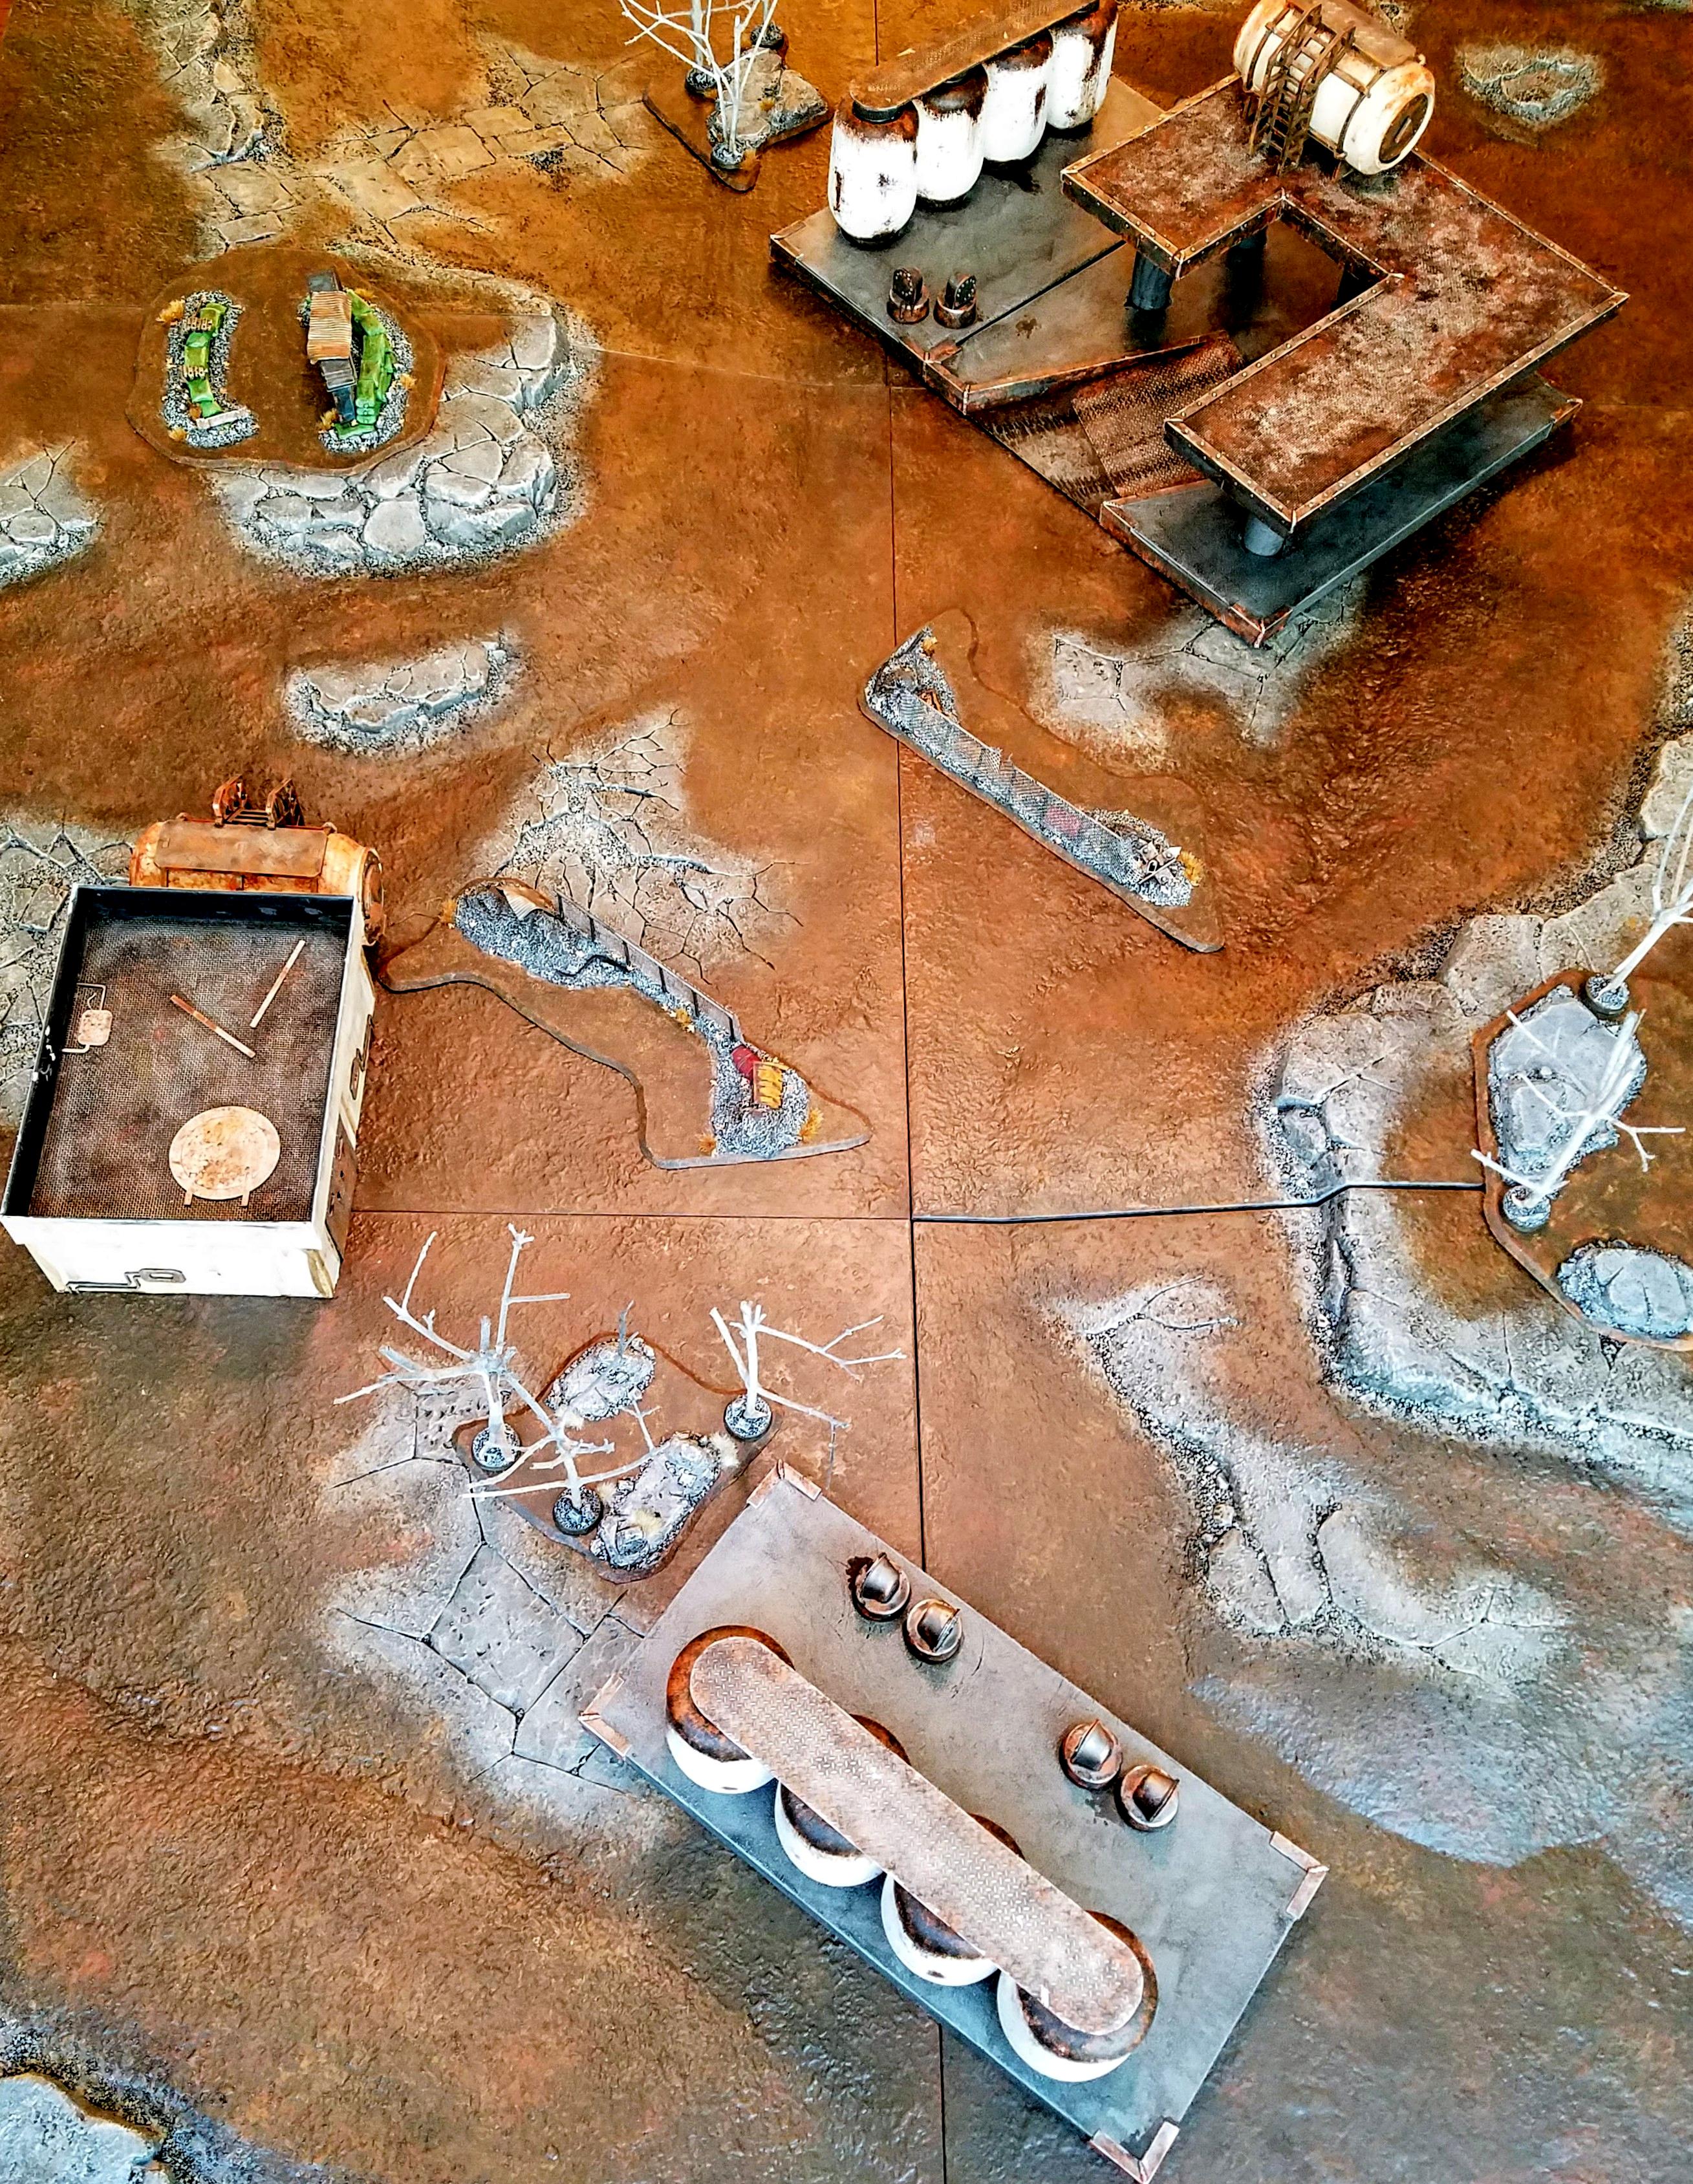 Setup for a recent game featuring the fuel depot